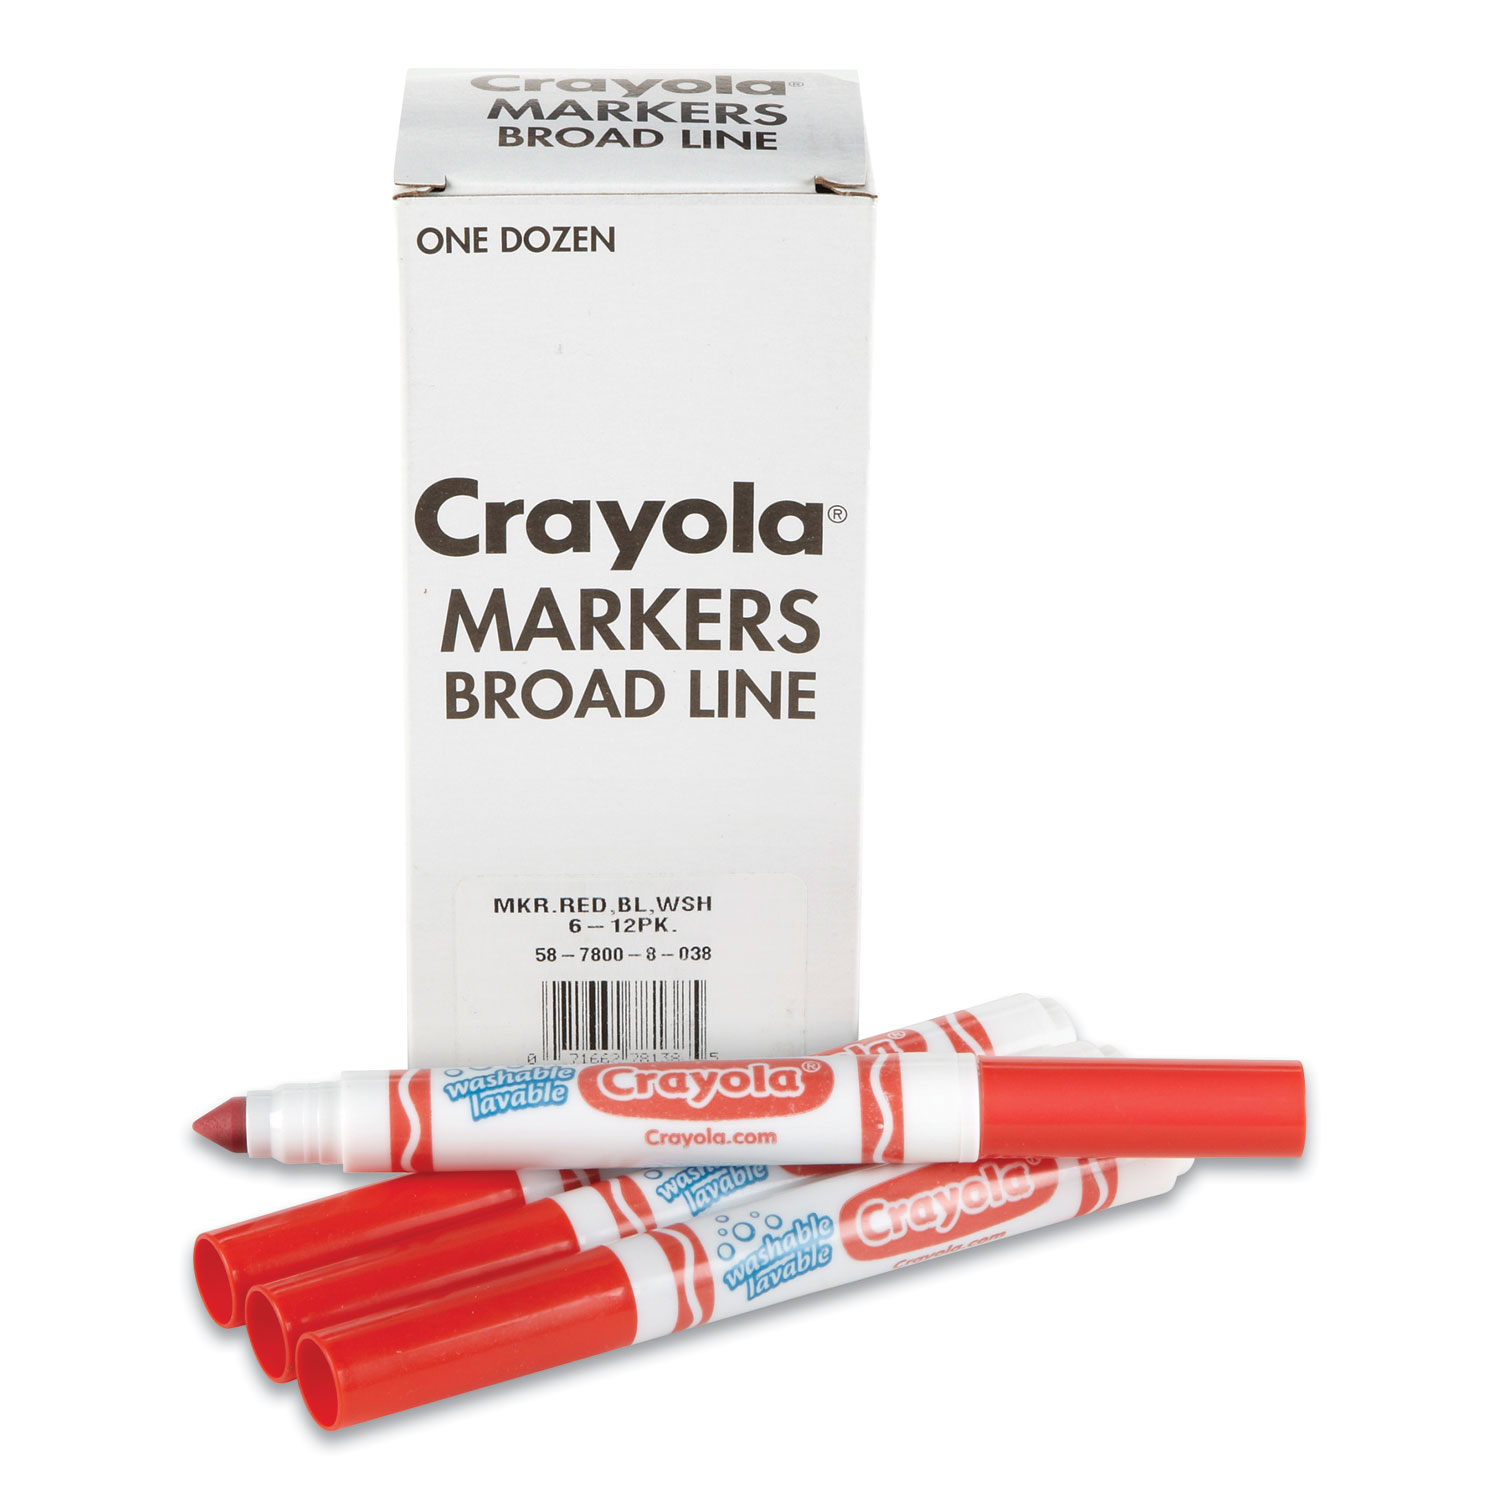 Crayola Washable Markers, Broad Line, Assorted Classic Colors, Box Of 12 